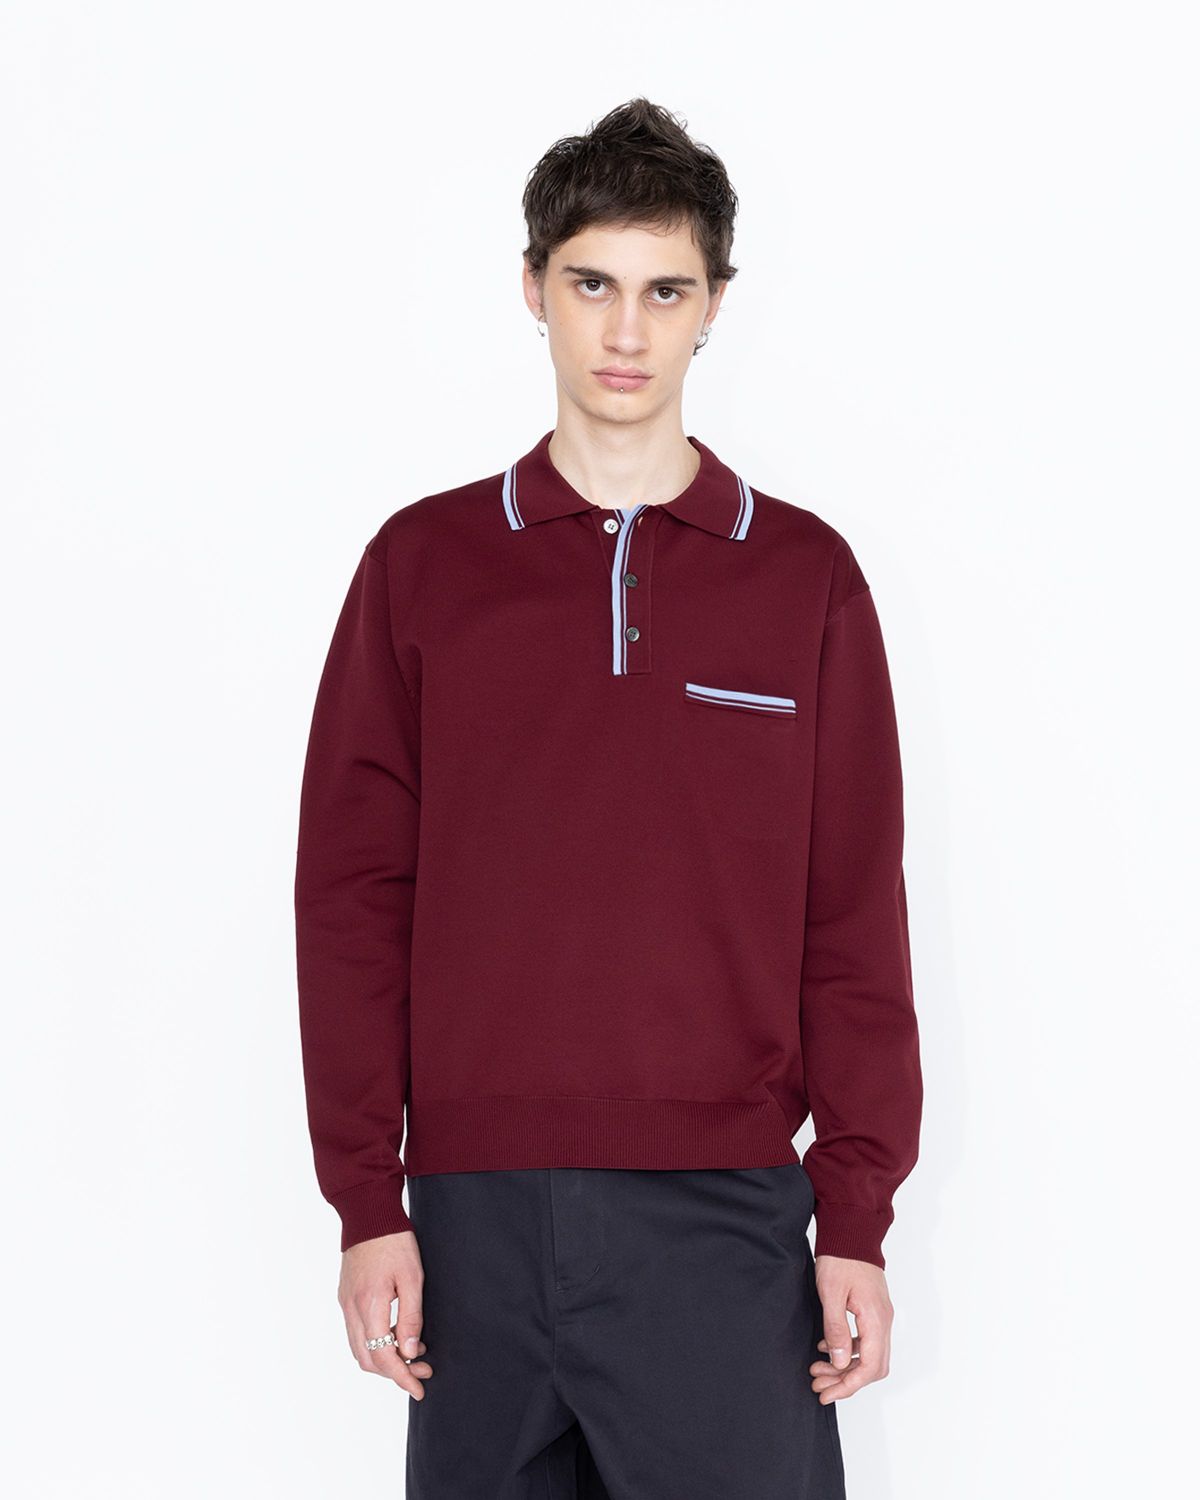 Highsnobiety HS05 – Long Sleeves Knit Polo Bordeaux - Longsleeves - Red - Image 3